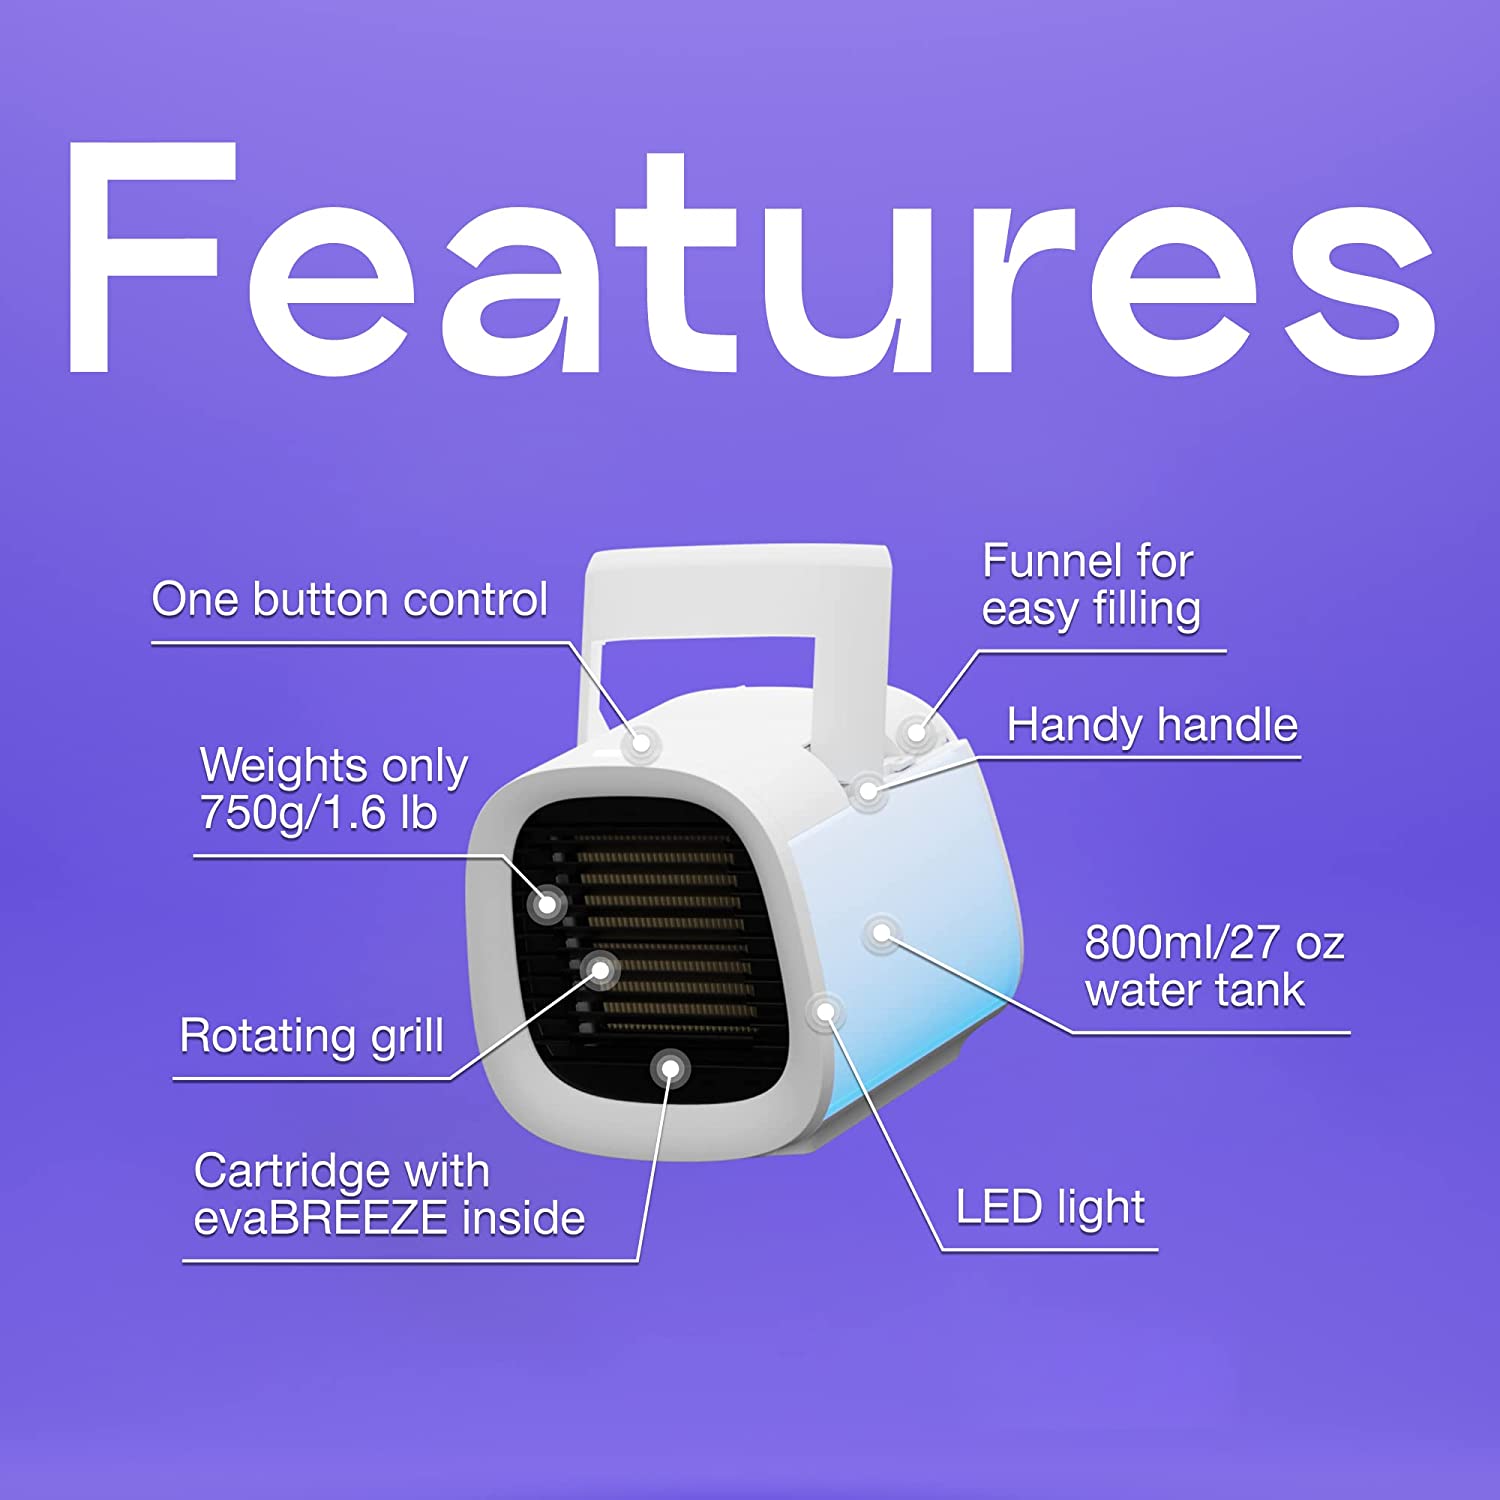 Personal Portable Air Cooler and Humidifier, with USB Connectivity and LED Light, White